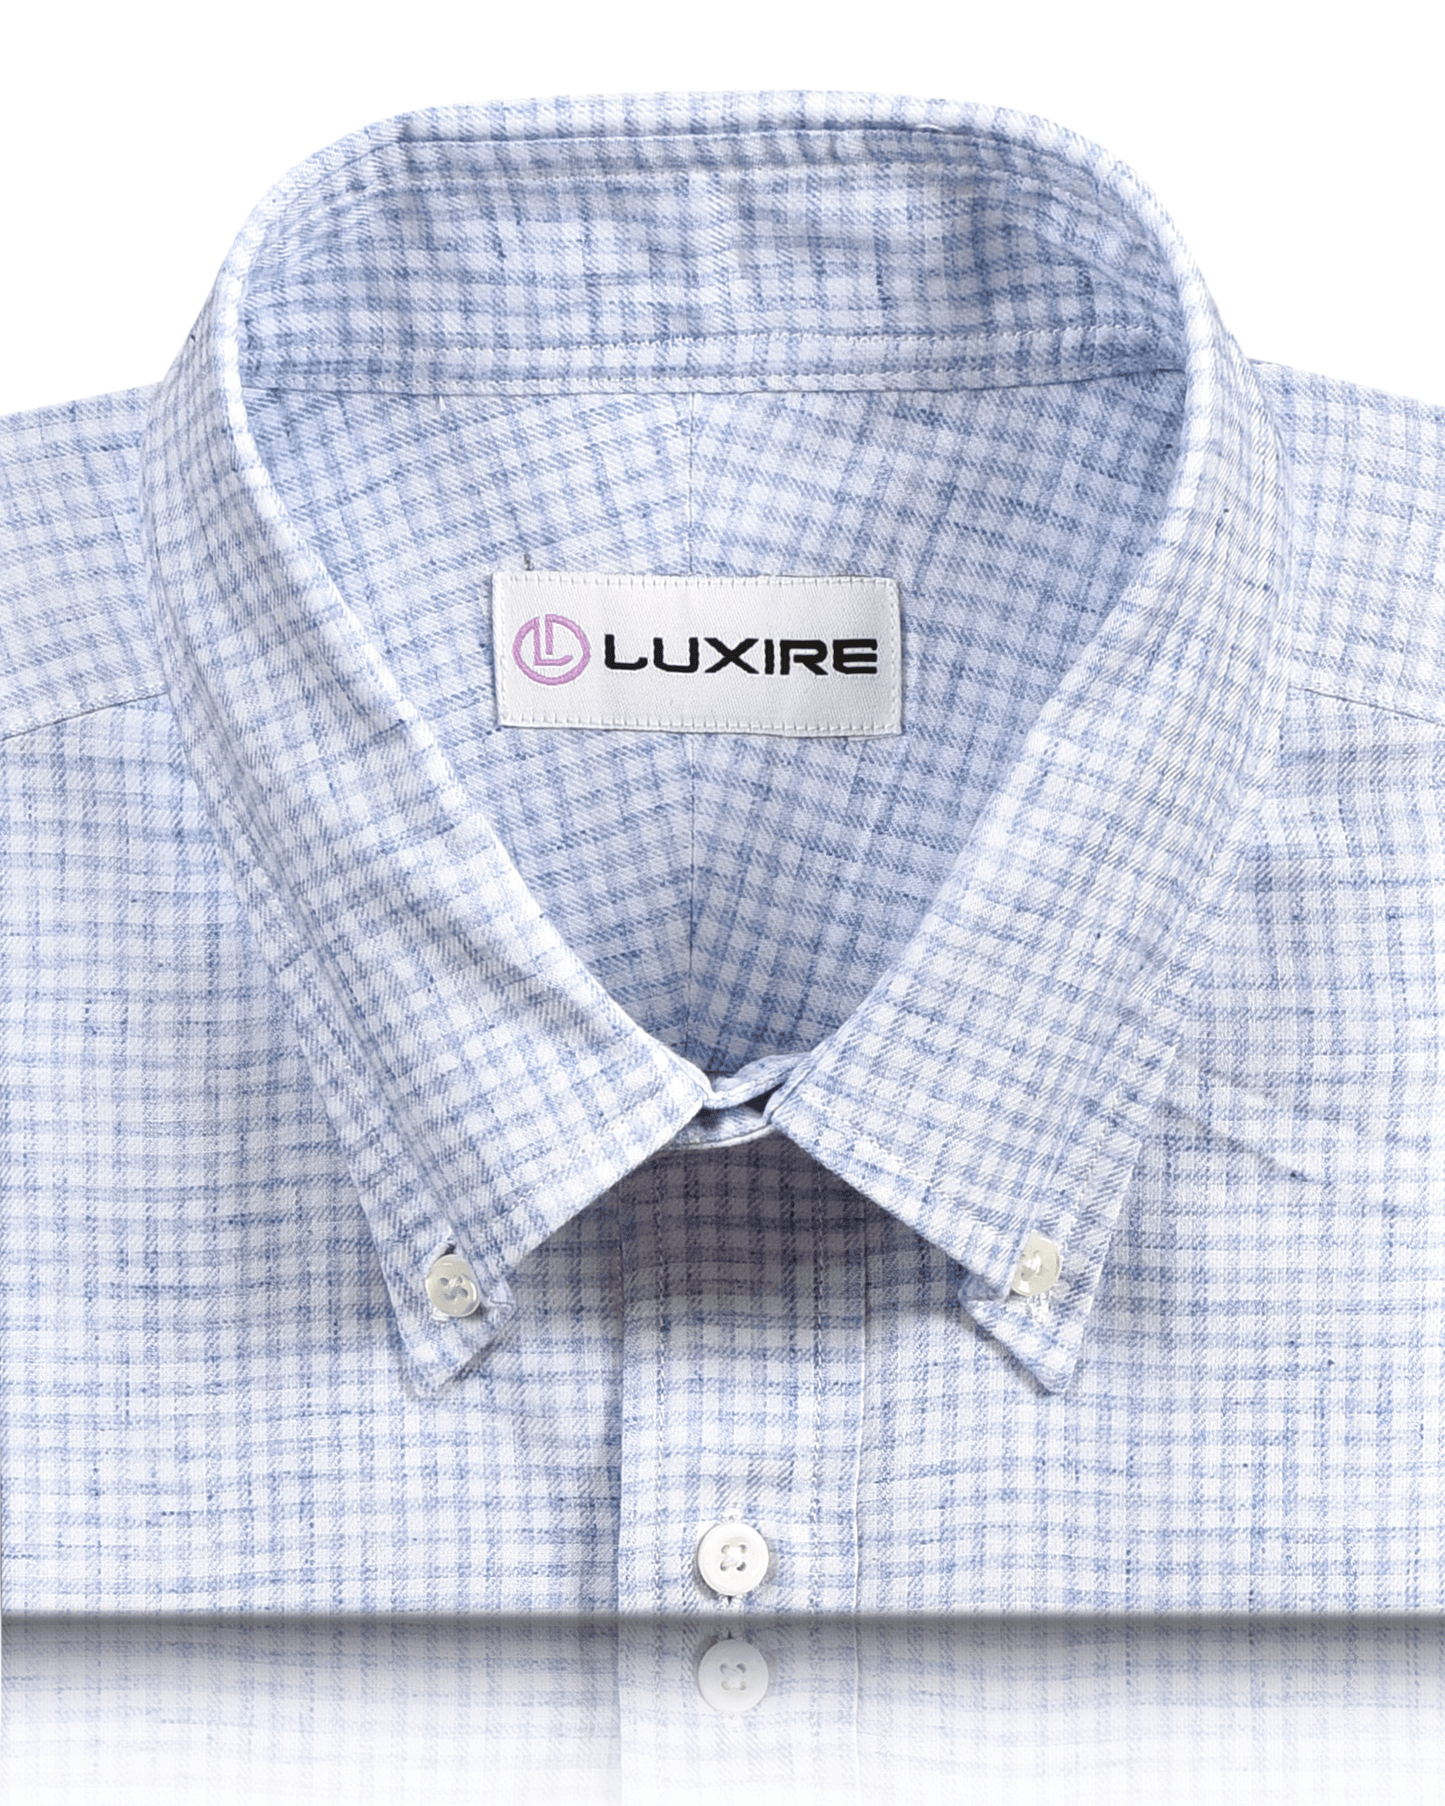 Front close view of custom check shirts for men by Luxire blue and white tattersall